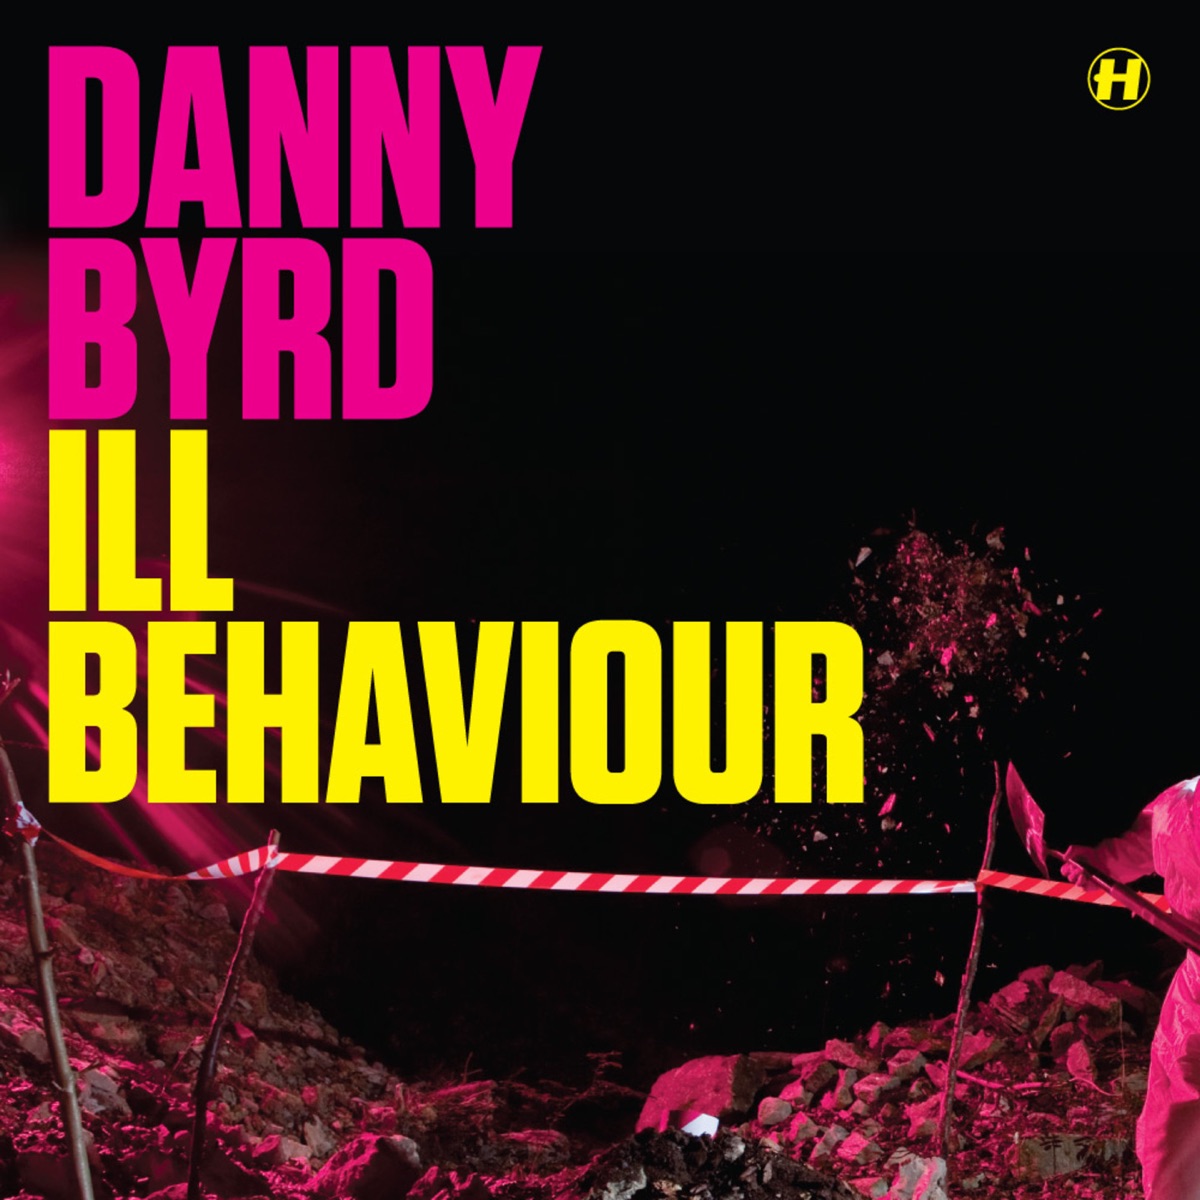 Danny Byrd ft. featuring I-Kay Ill Behaviour cover artwork